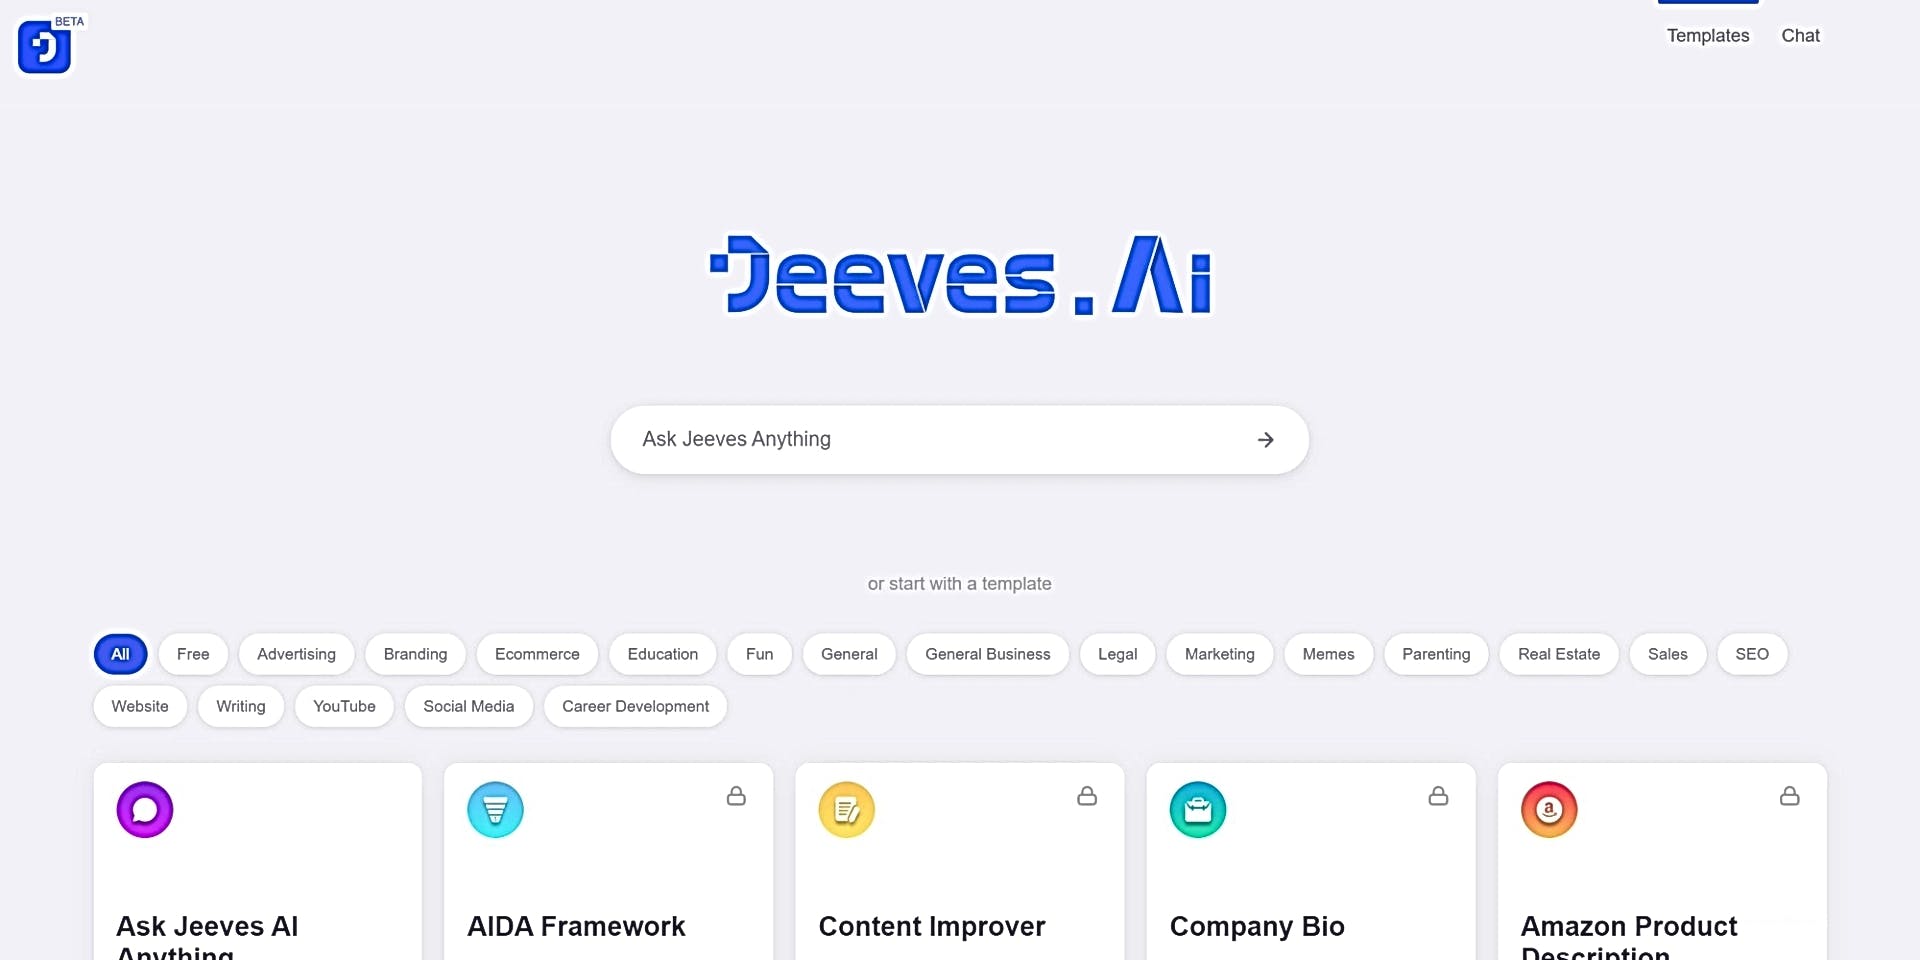 Jeeves.ai featured